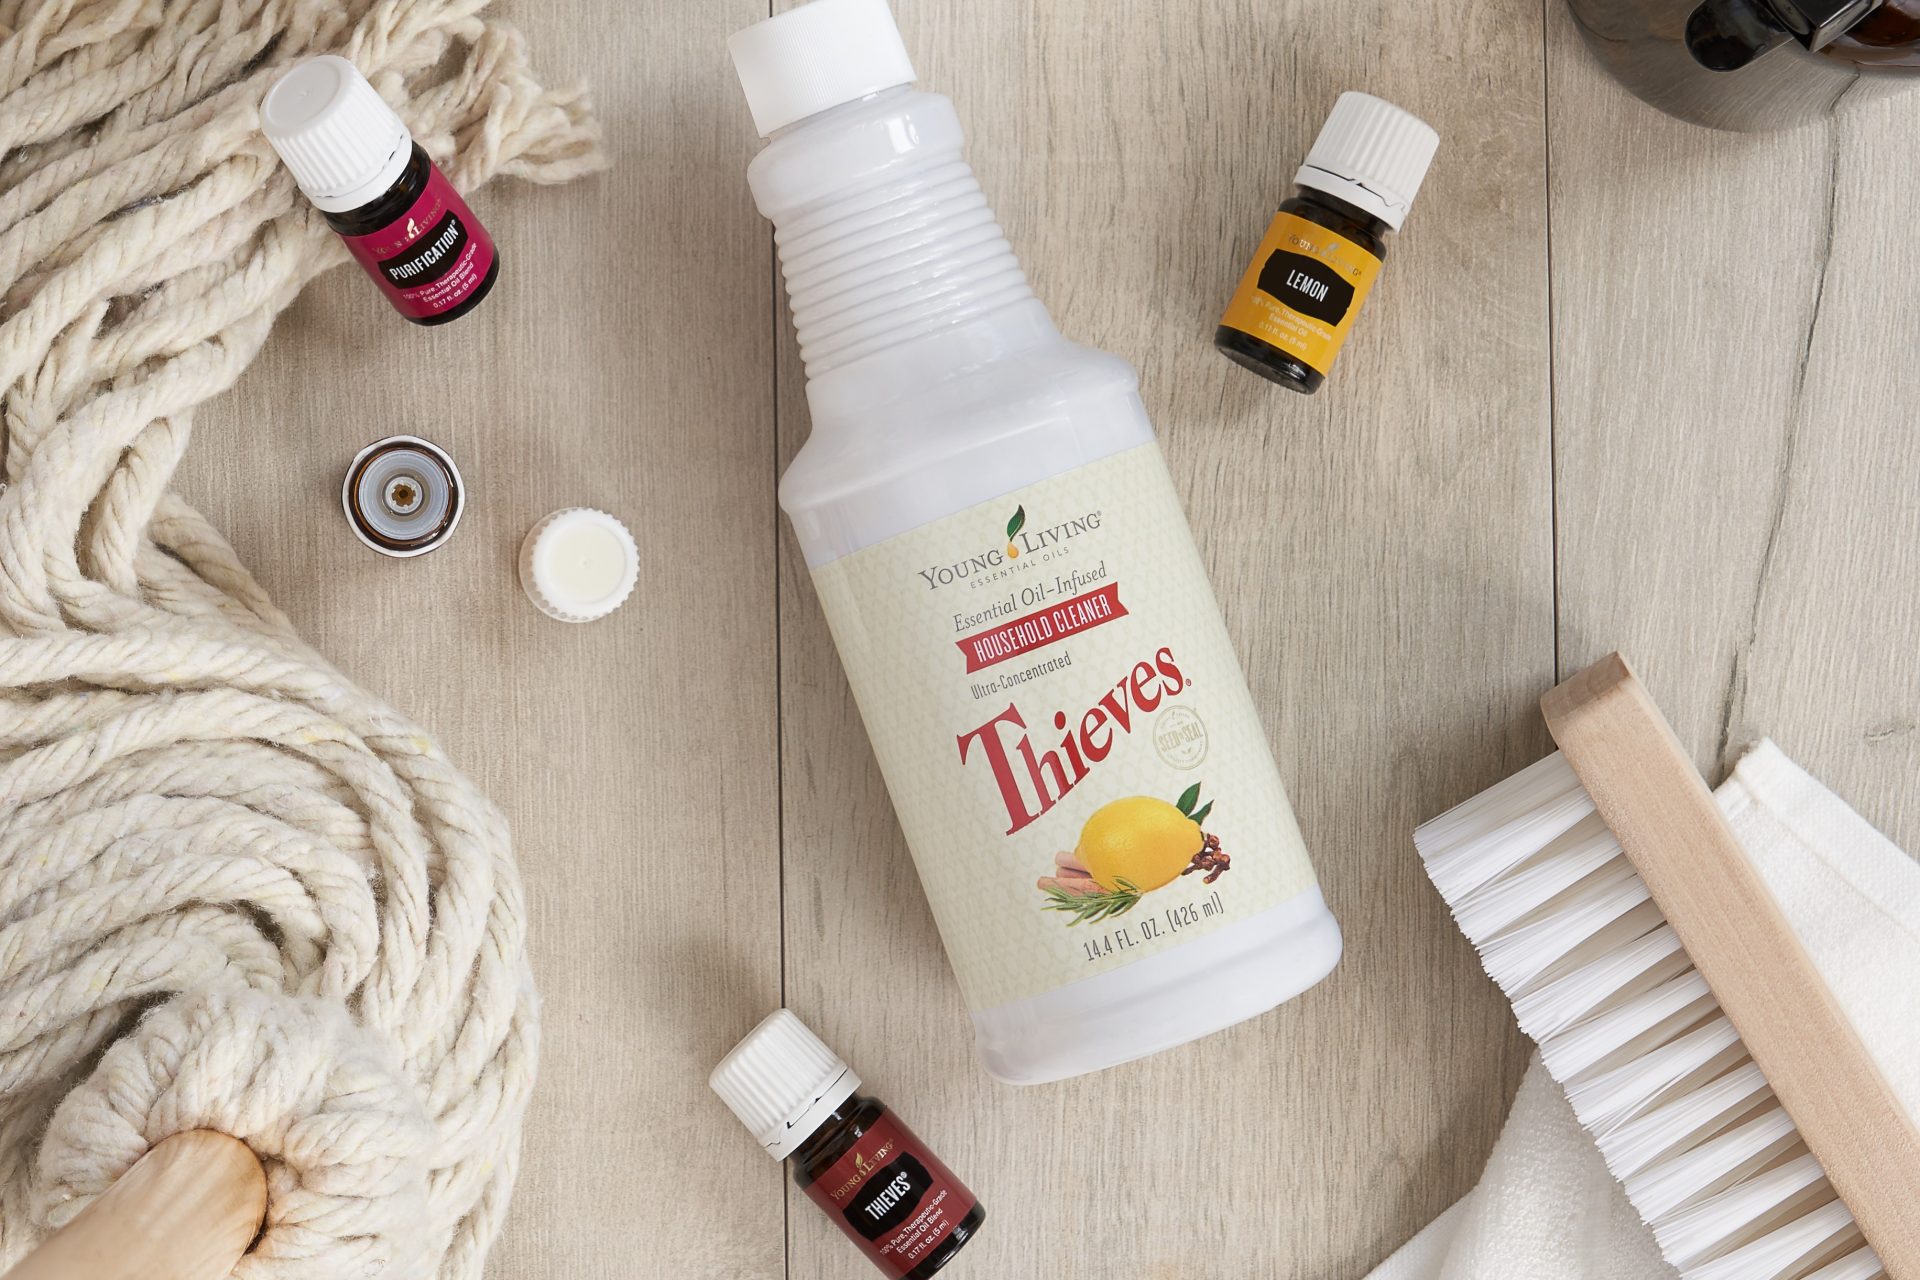 Thieves household cleaner, purification, thieves, aand lemon essential oils surrounded by cleaning supplies